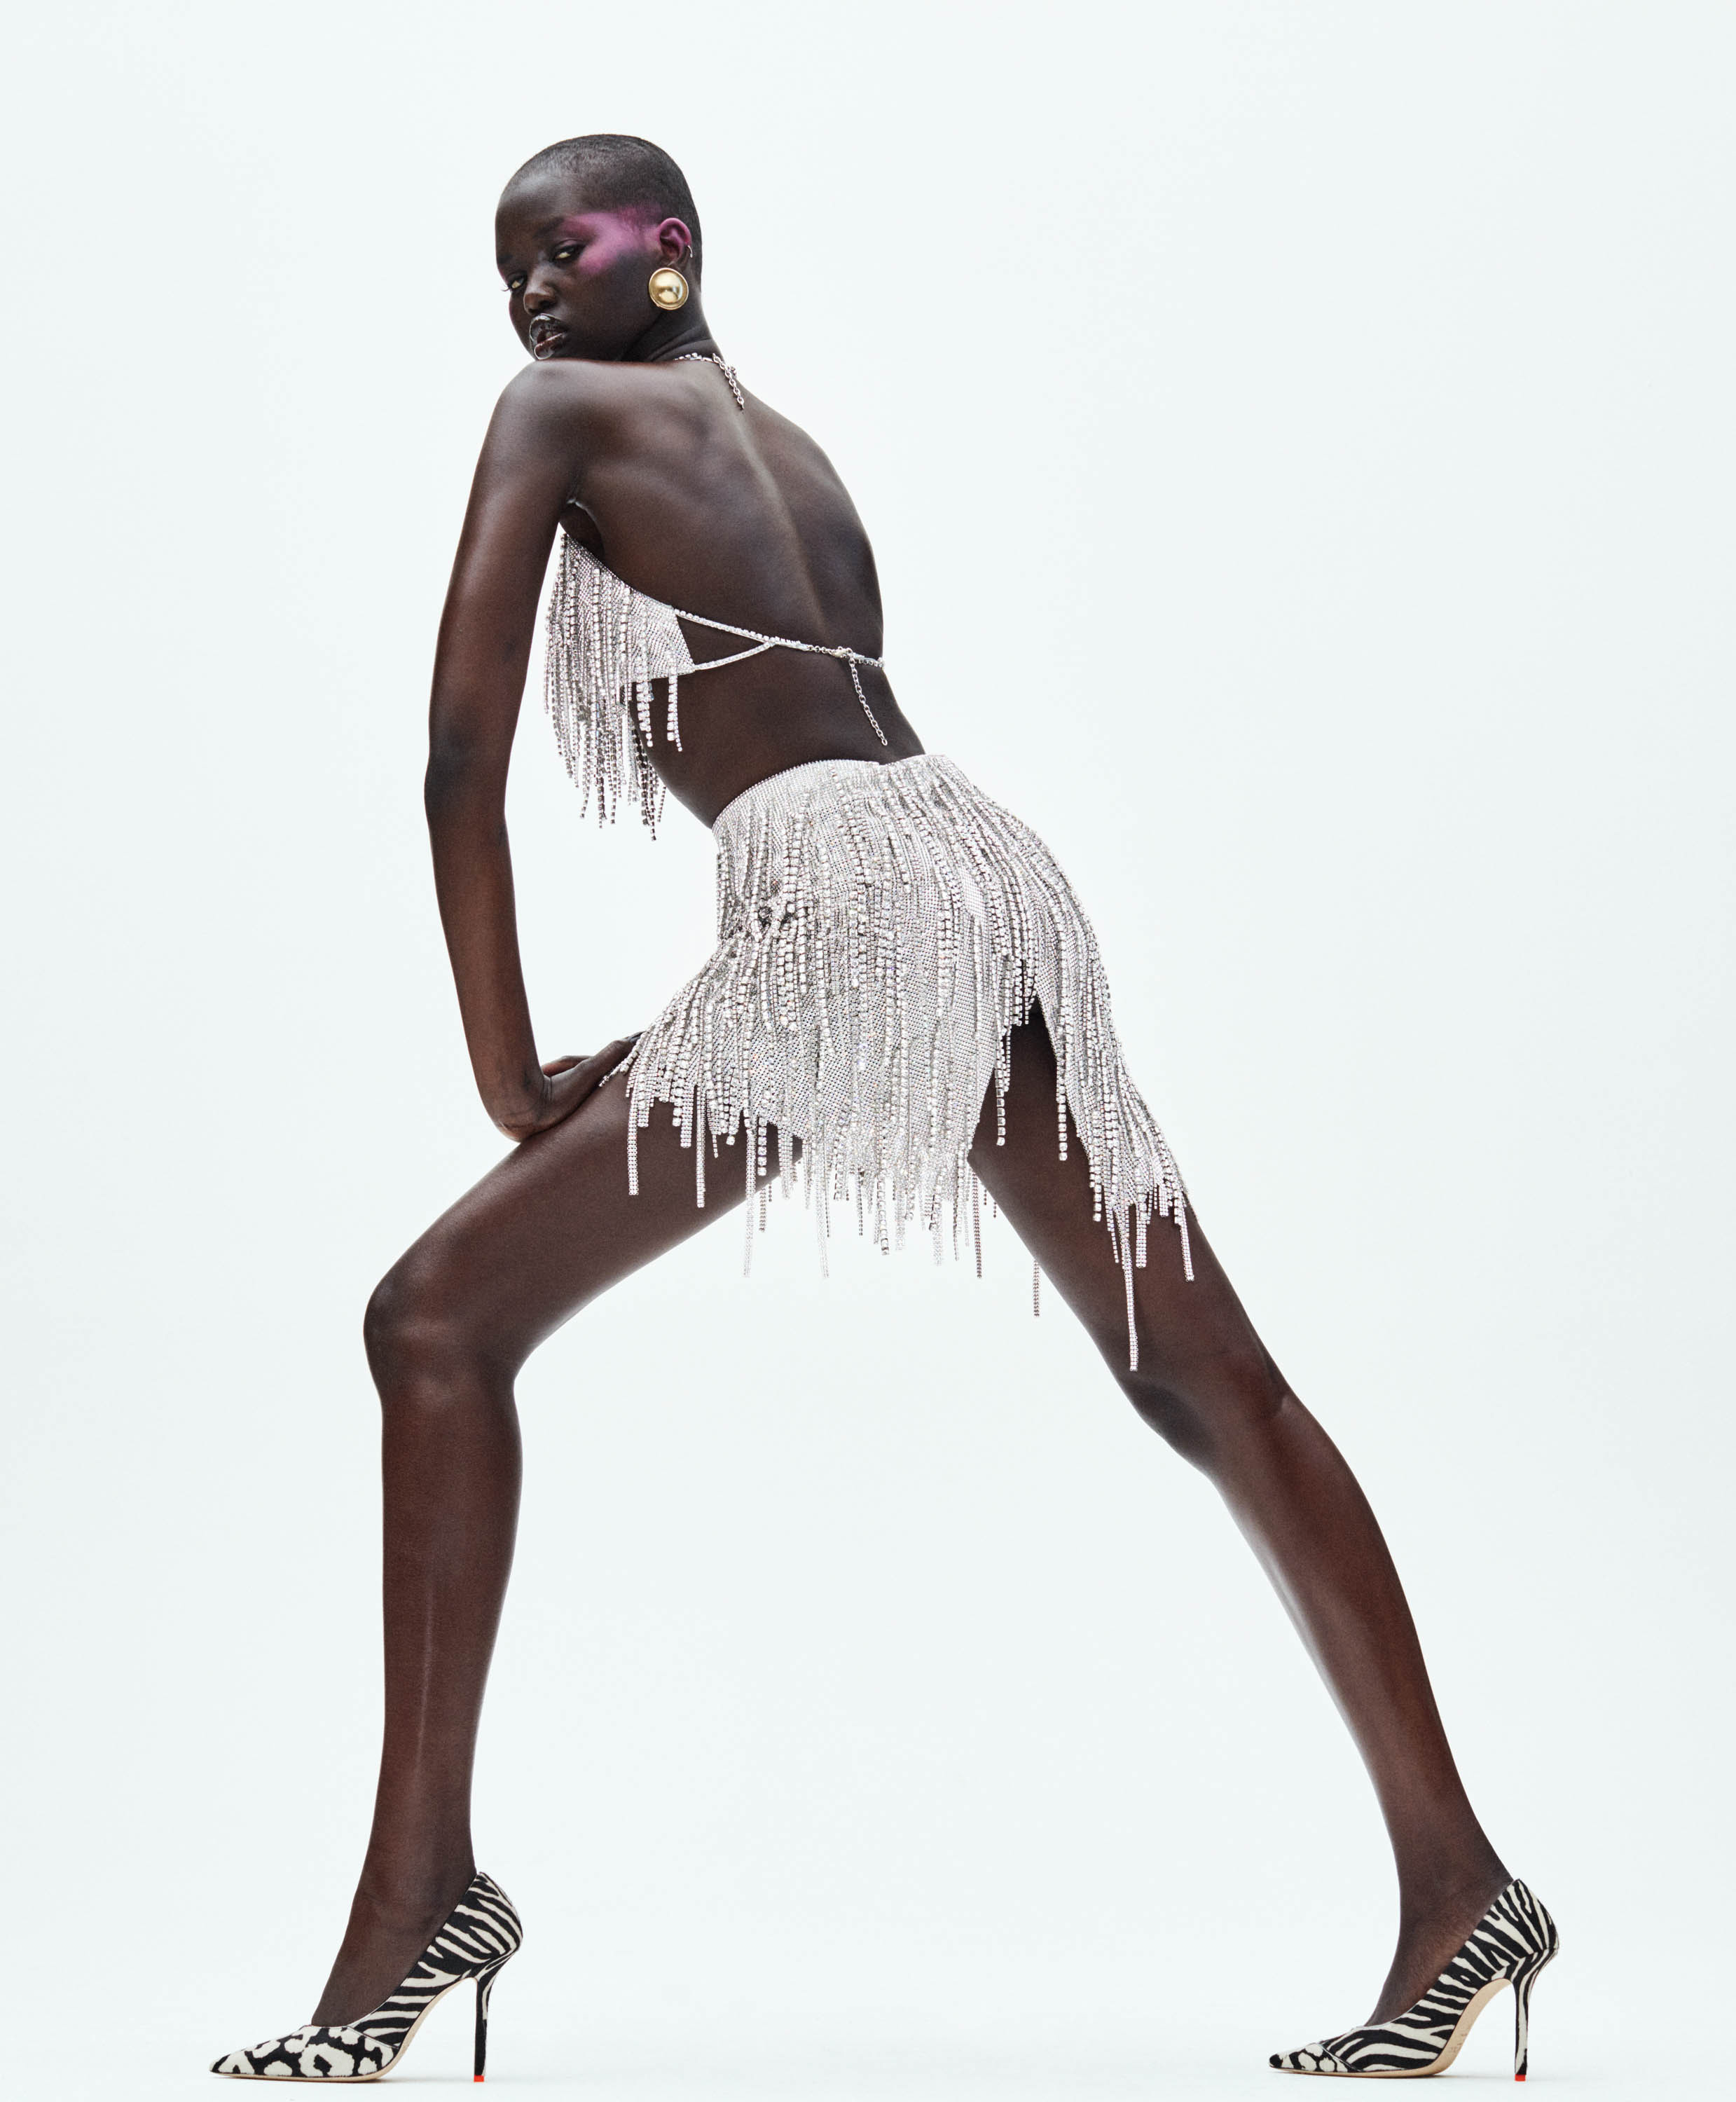 Adut Akech and her Mile Long Legs - Photo 1